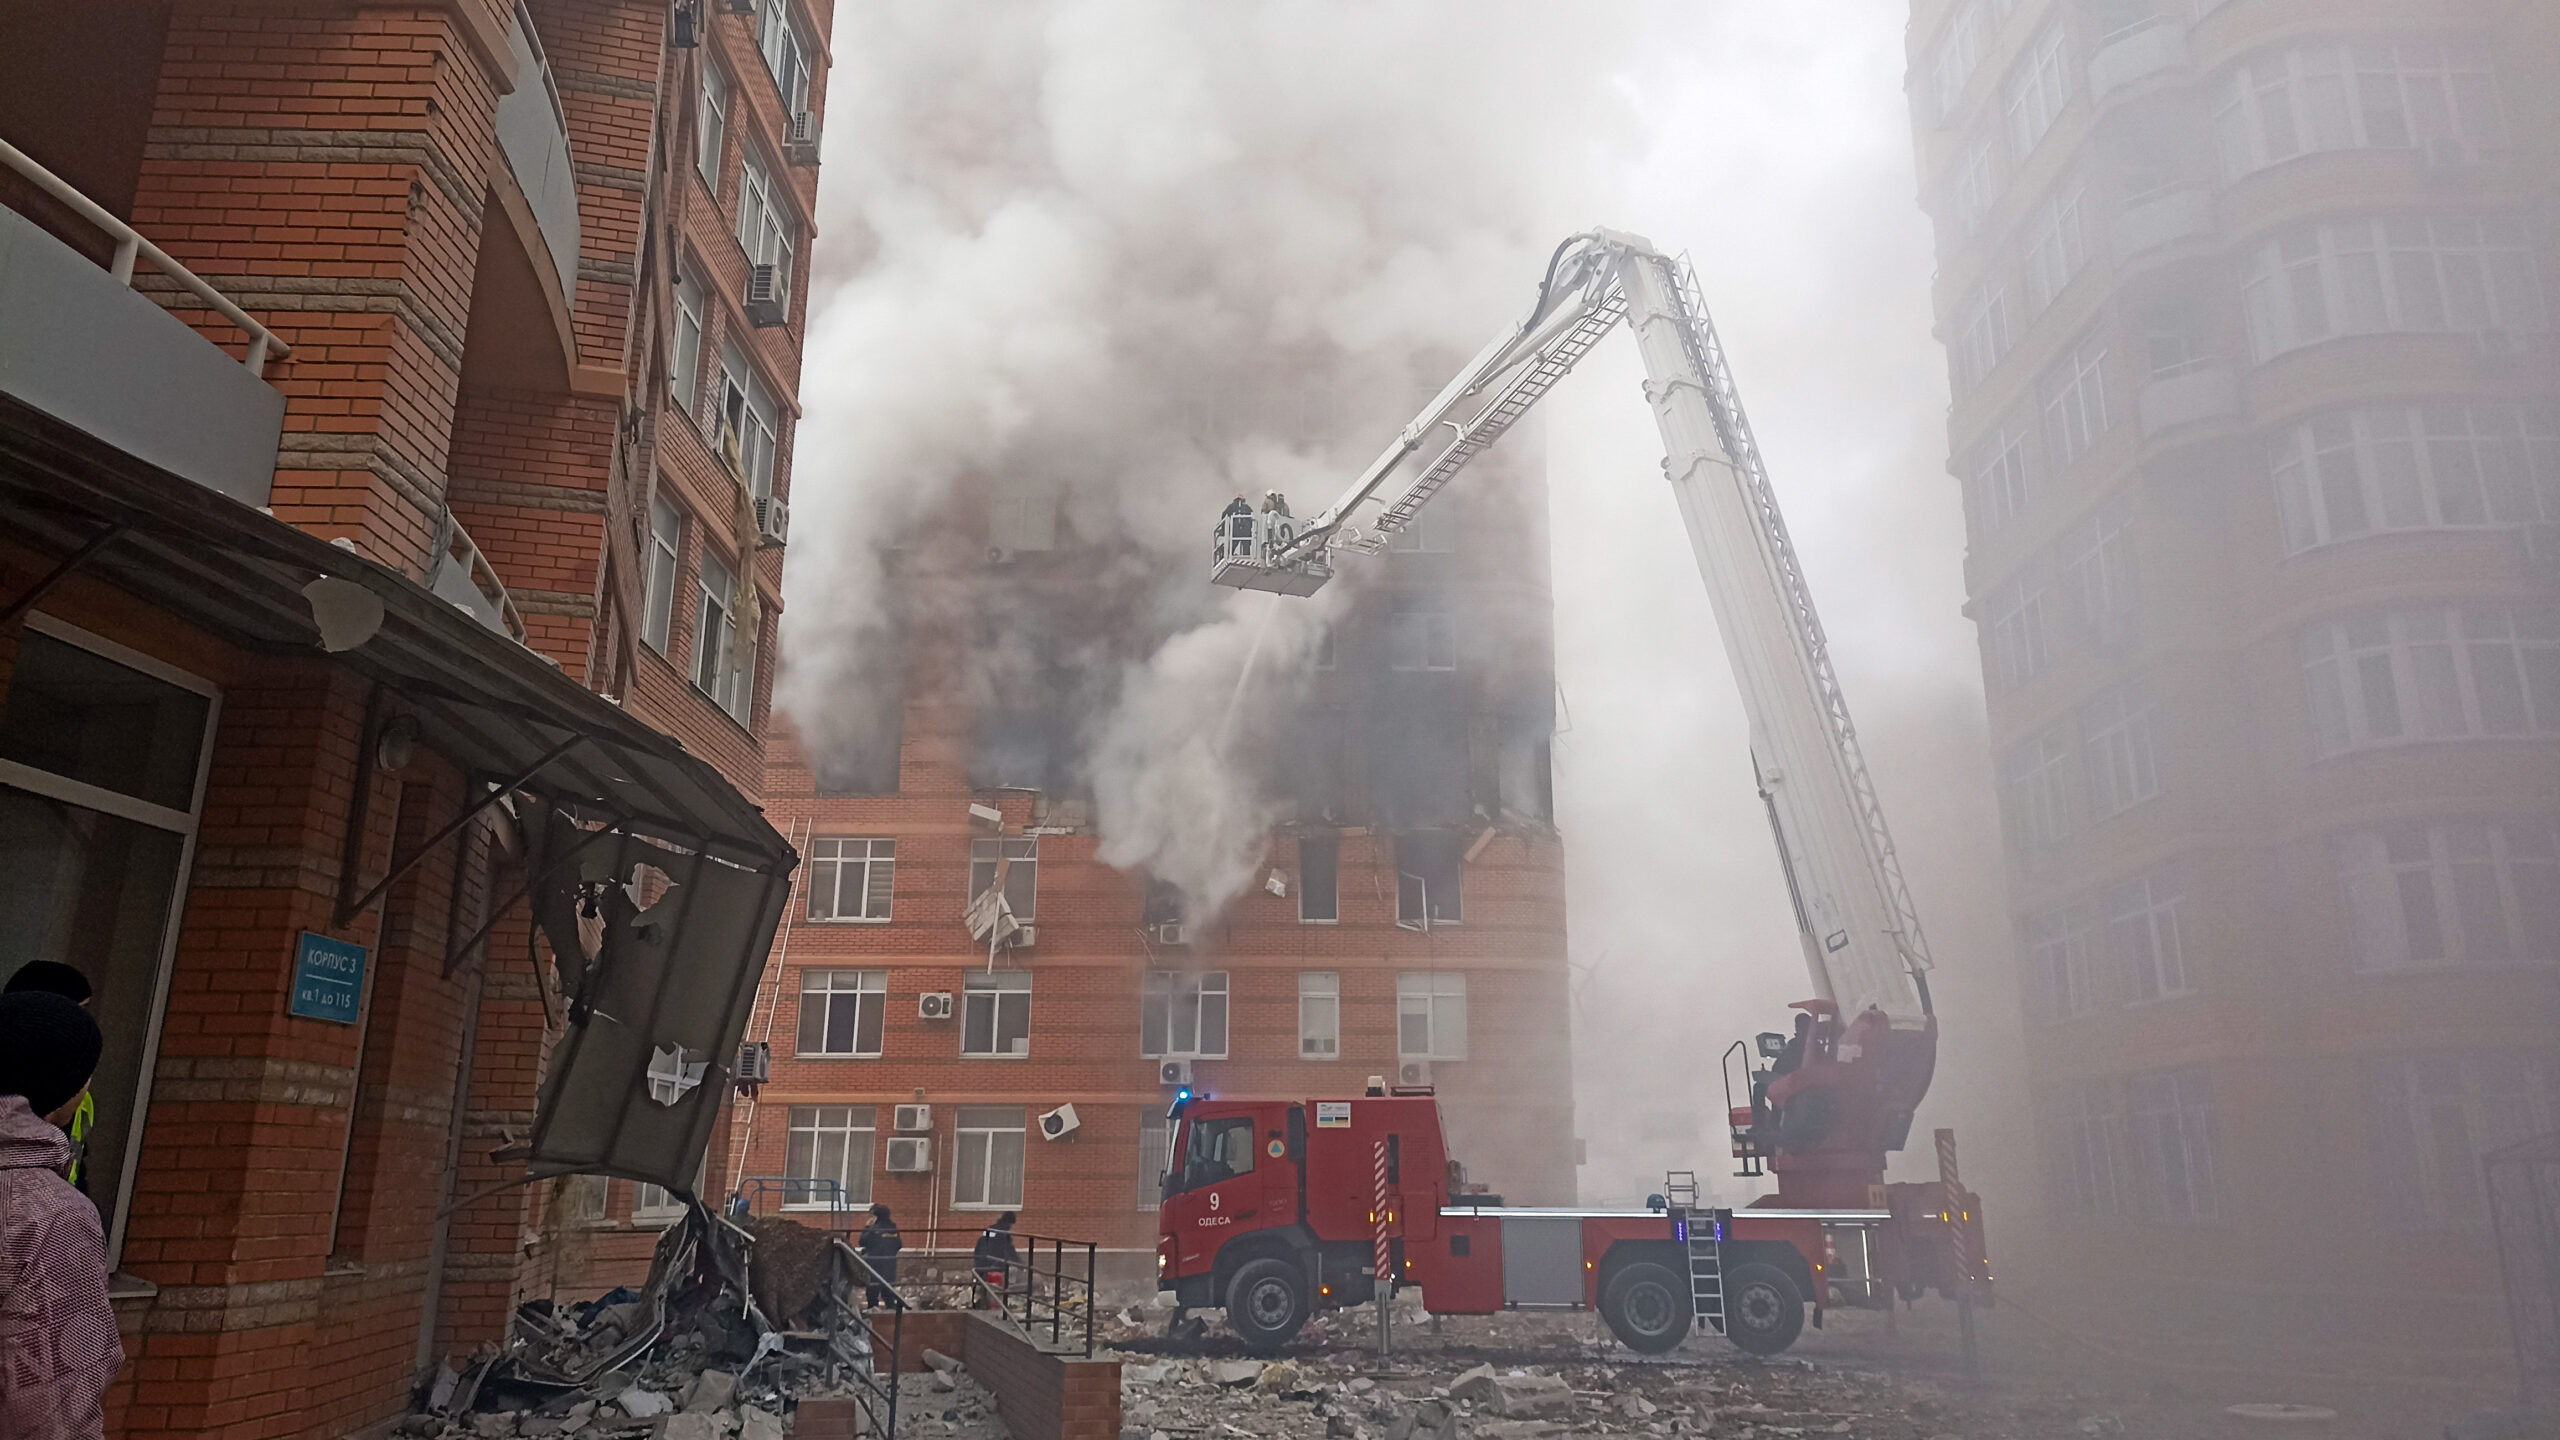 Odesa: Firefighters work to extinguish a fire at a damaged apartment building.